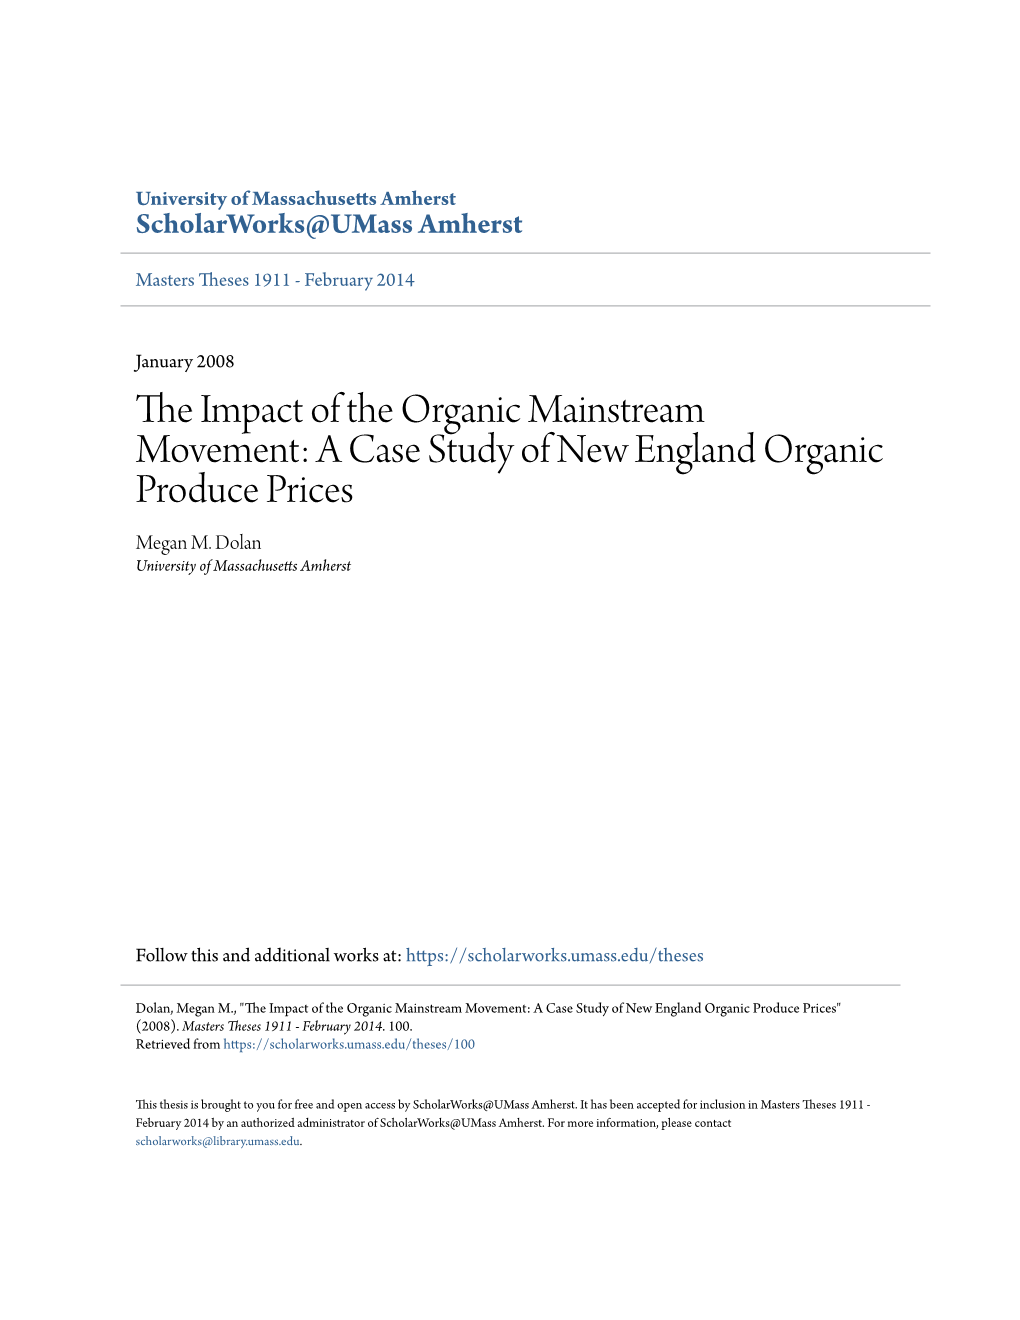 A Case Study of New England Organic Produce Prices Megan M